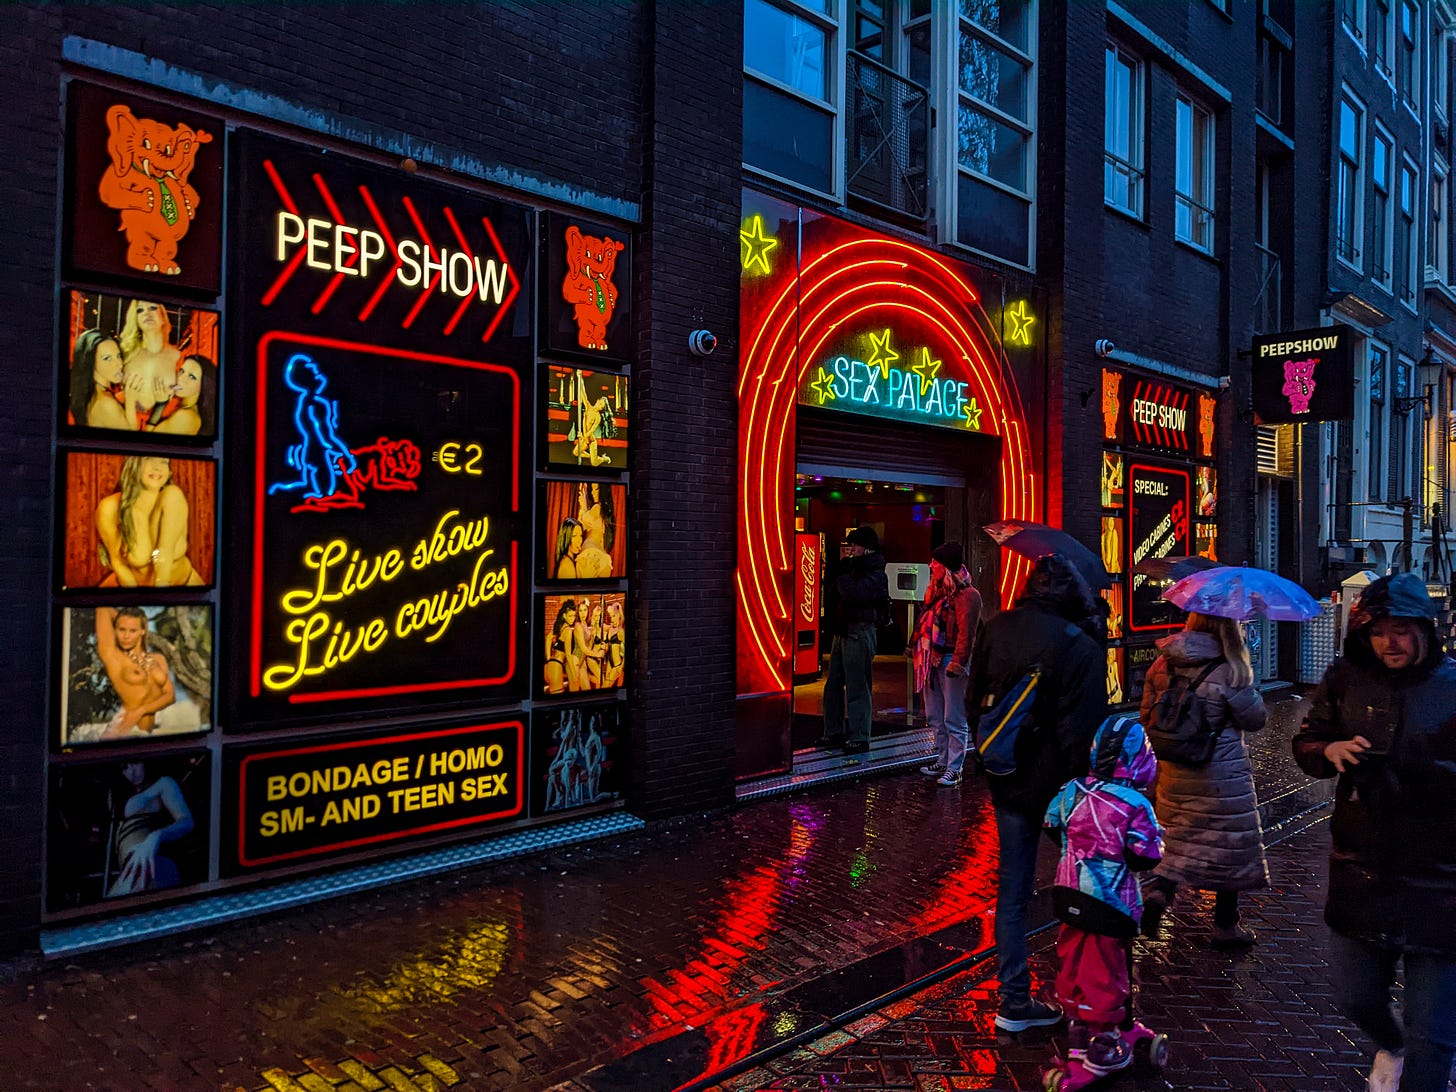 One of Amsterdam's sex clubs called the Sex Palace with lots of red neon and risque photos of women. 